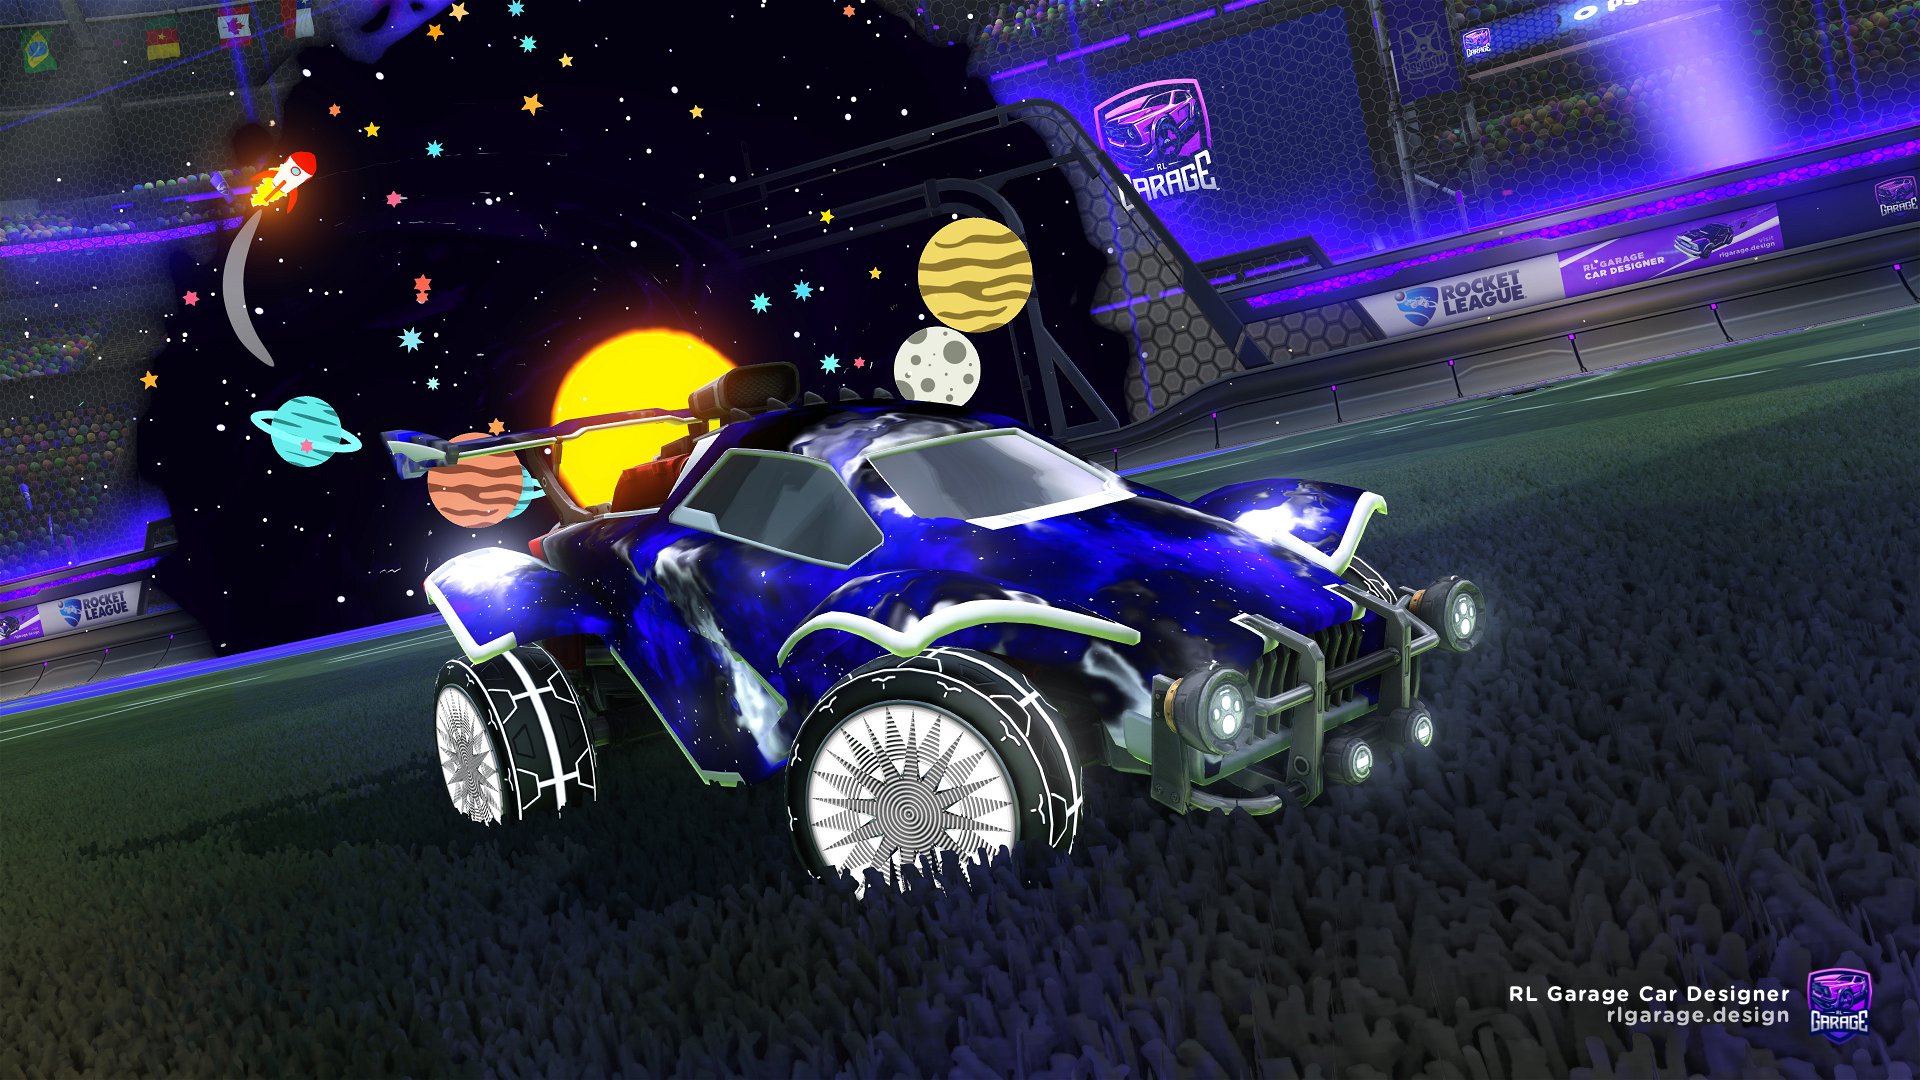 A Rocket League car design by OrthodoxCow2158